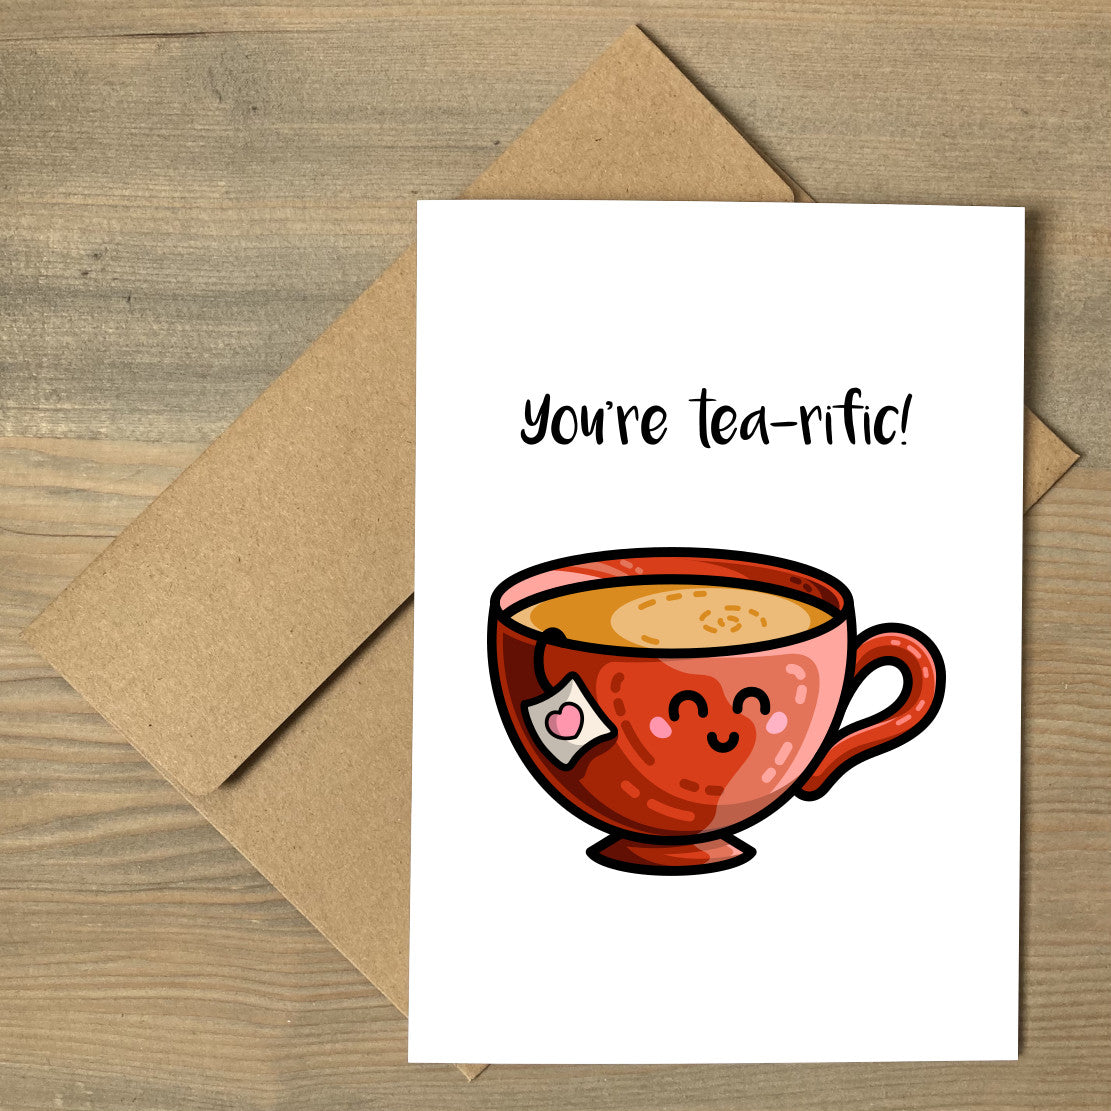 A white greeting card lying flat on a brown envelope, with a design of a kawaii cute red teacup and the wording above reading You're tea-rific!